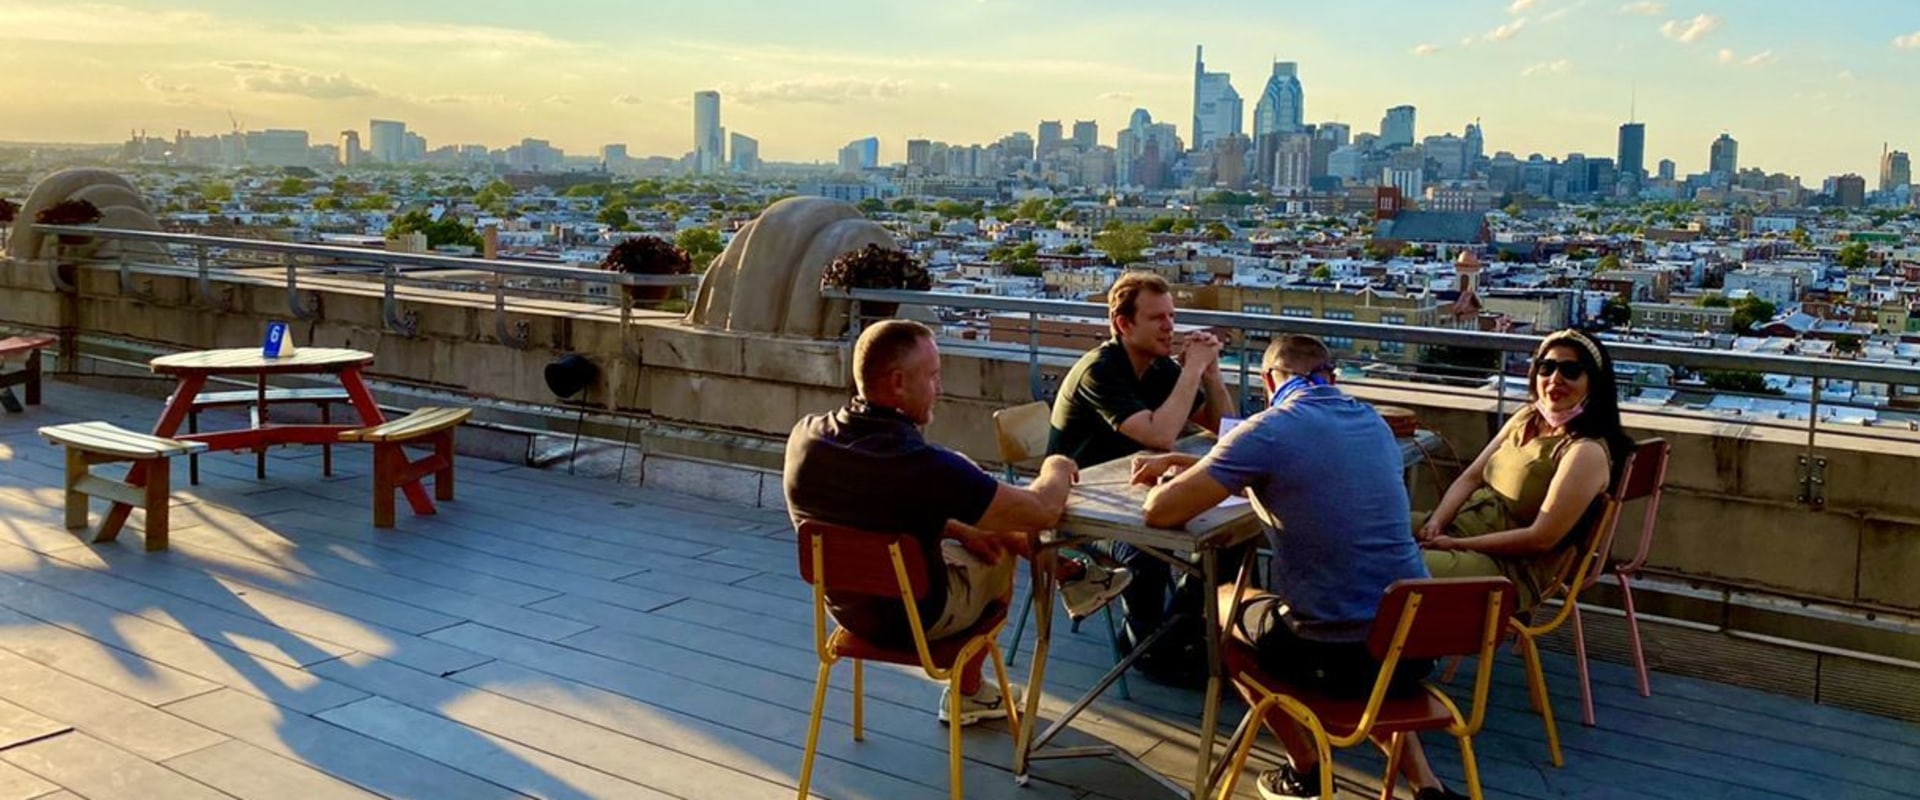 The Best Rooftop Restaurants with a View of the City in Philadelphia, Pennsylvania